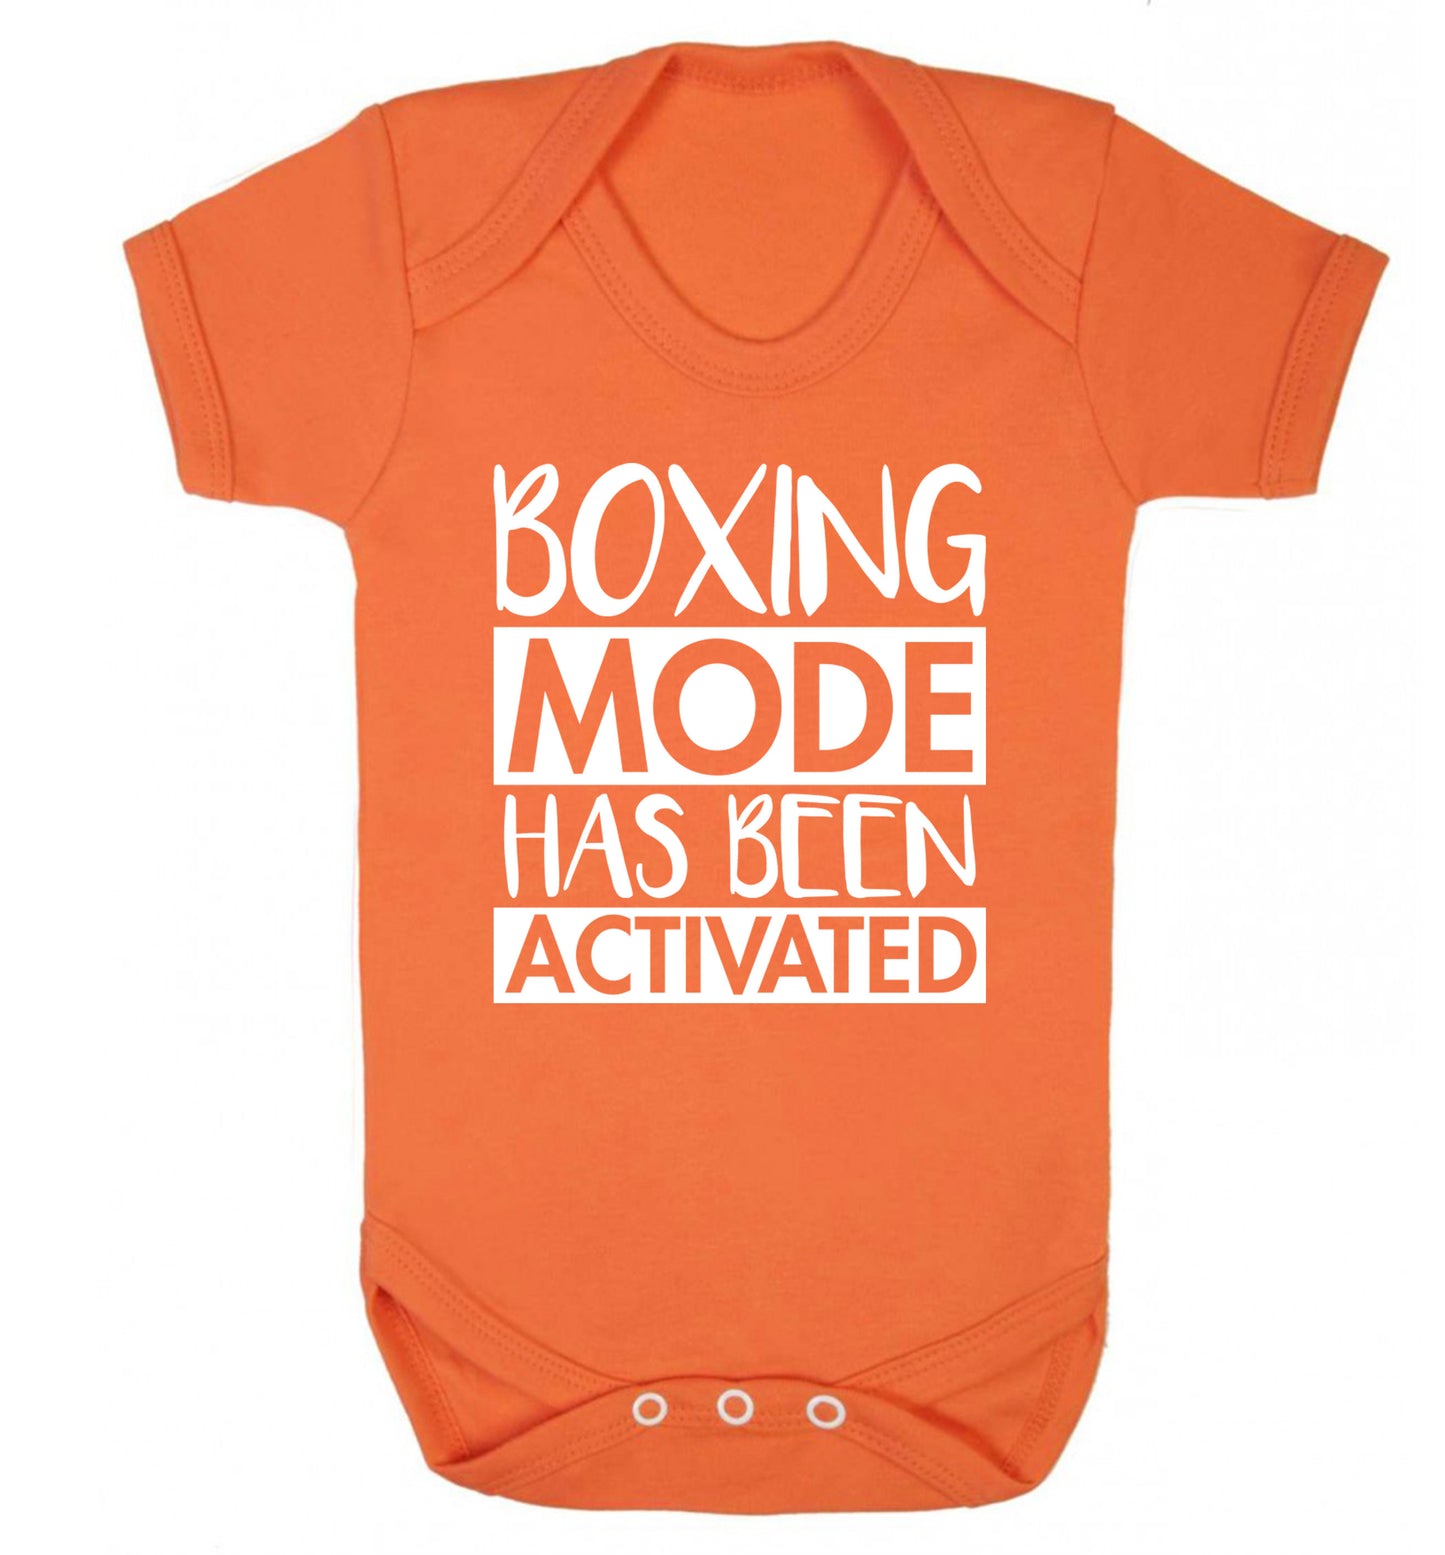 Boxing mode activated Baby Vest orange 18-24 months